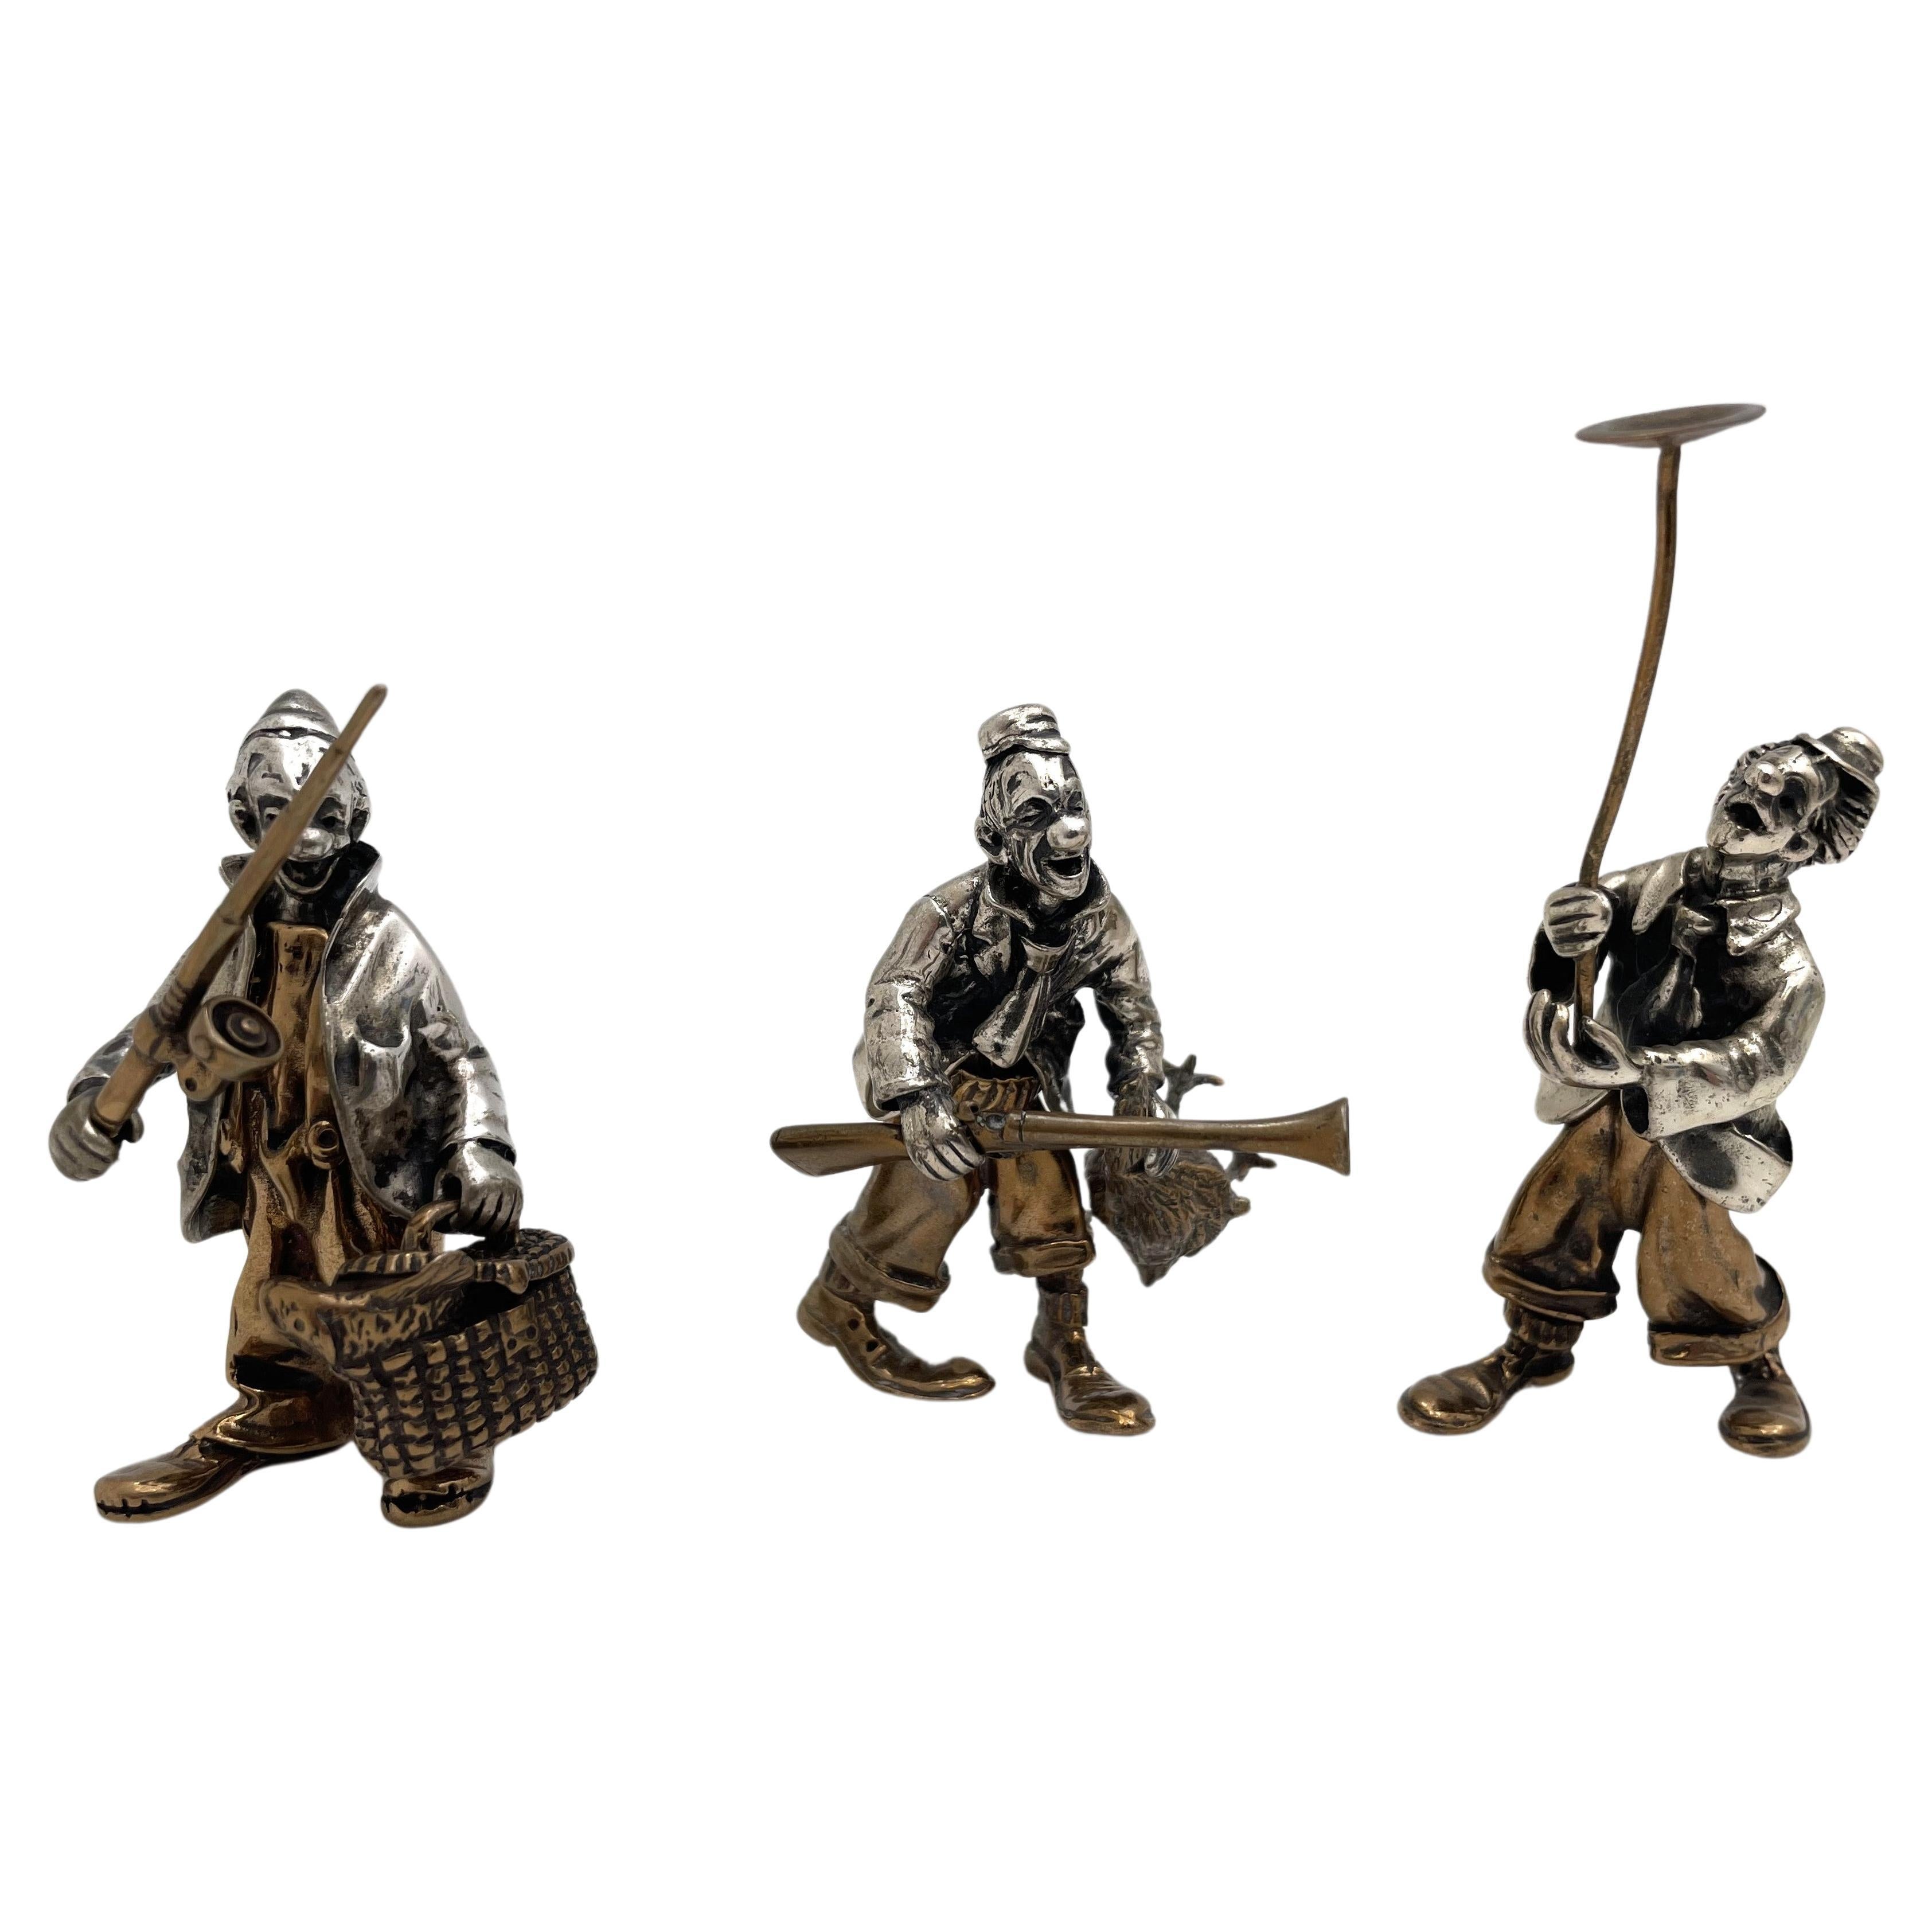 Italian Silver & Mixed Metal Set of 3 Realistic Circus Clowns Mid-20th Century